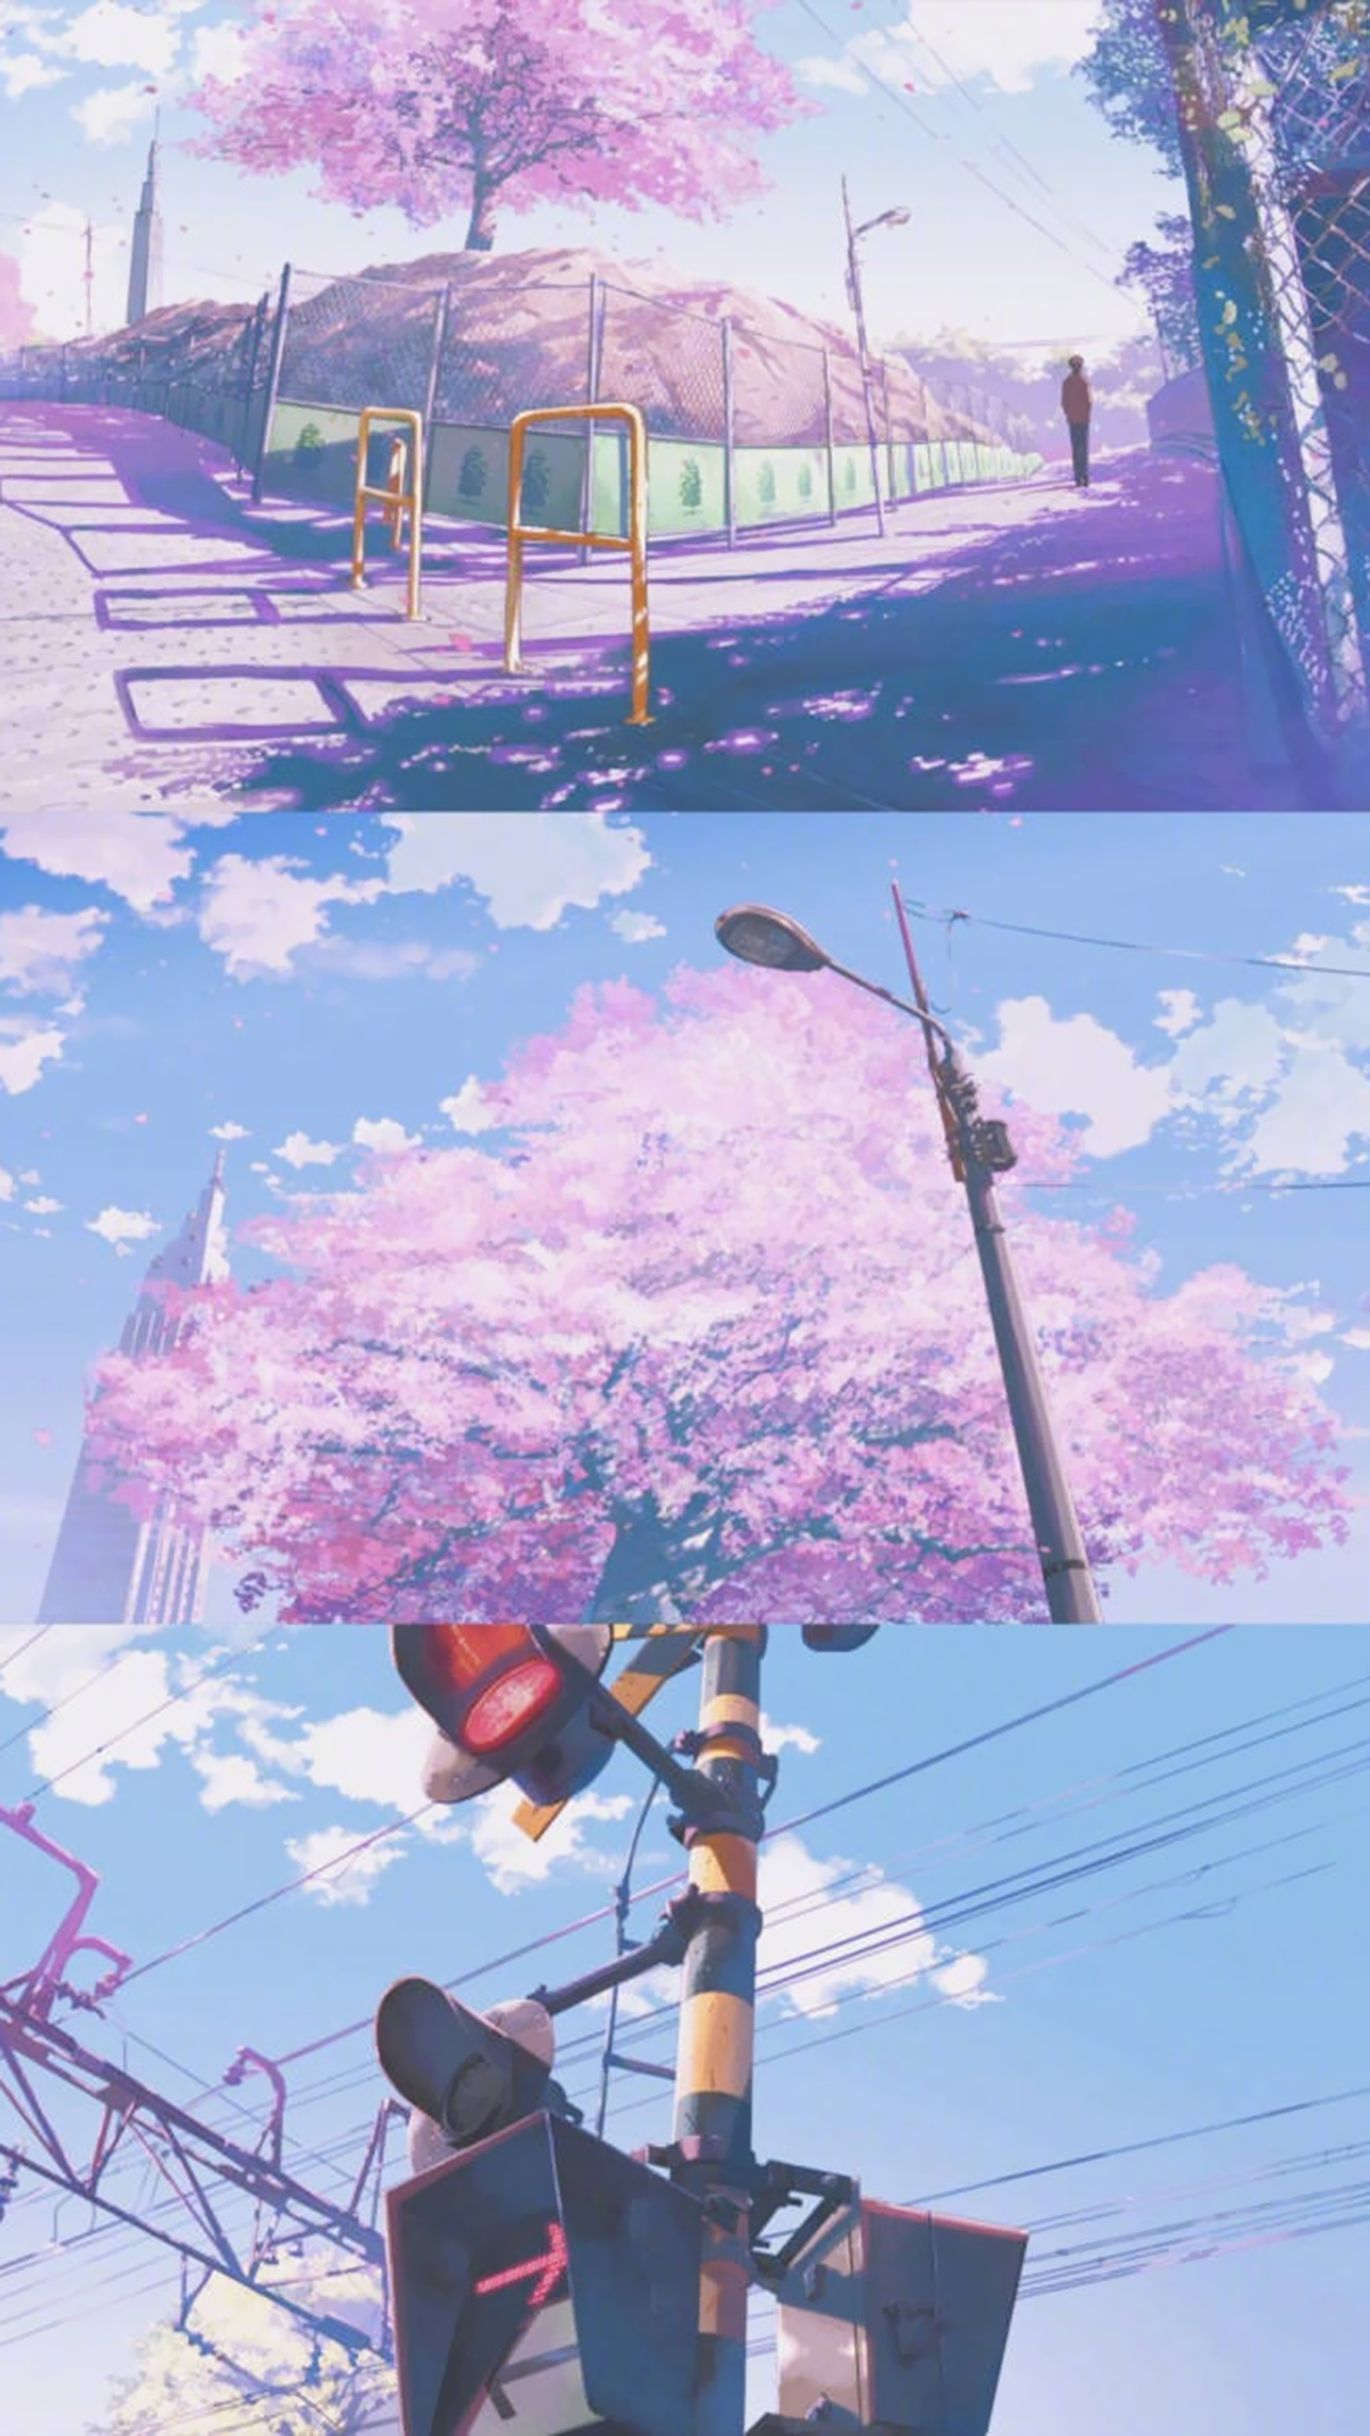 Cherry blossoms wallpaper. Anime background wallpaper, Anime scenery wallpaper, Anime scenery